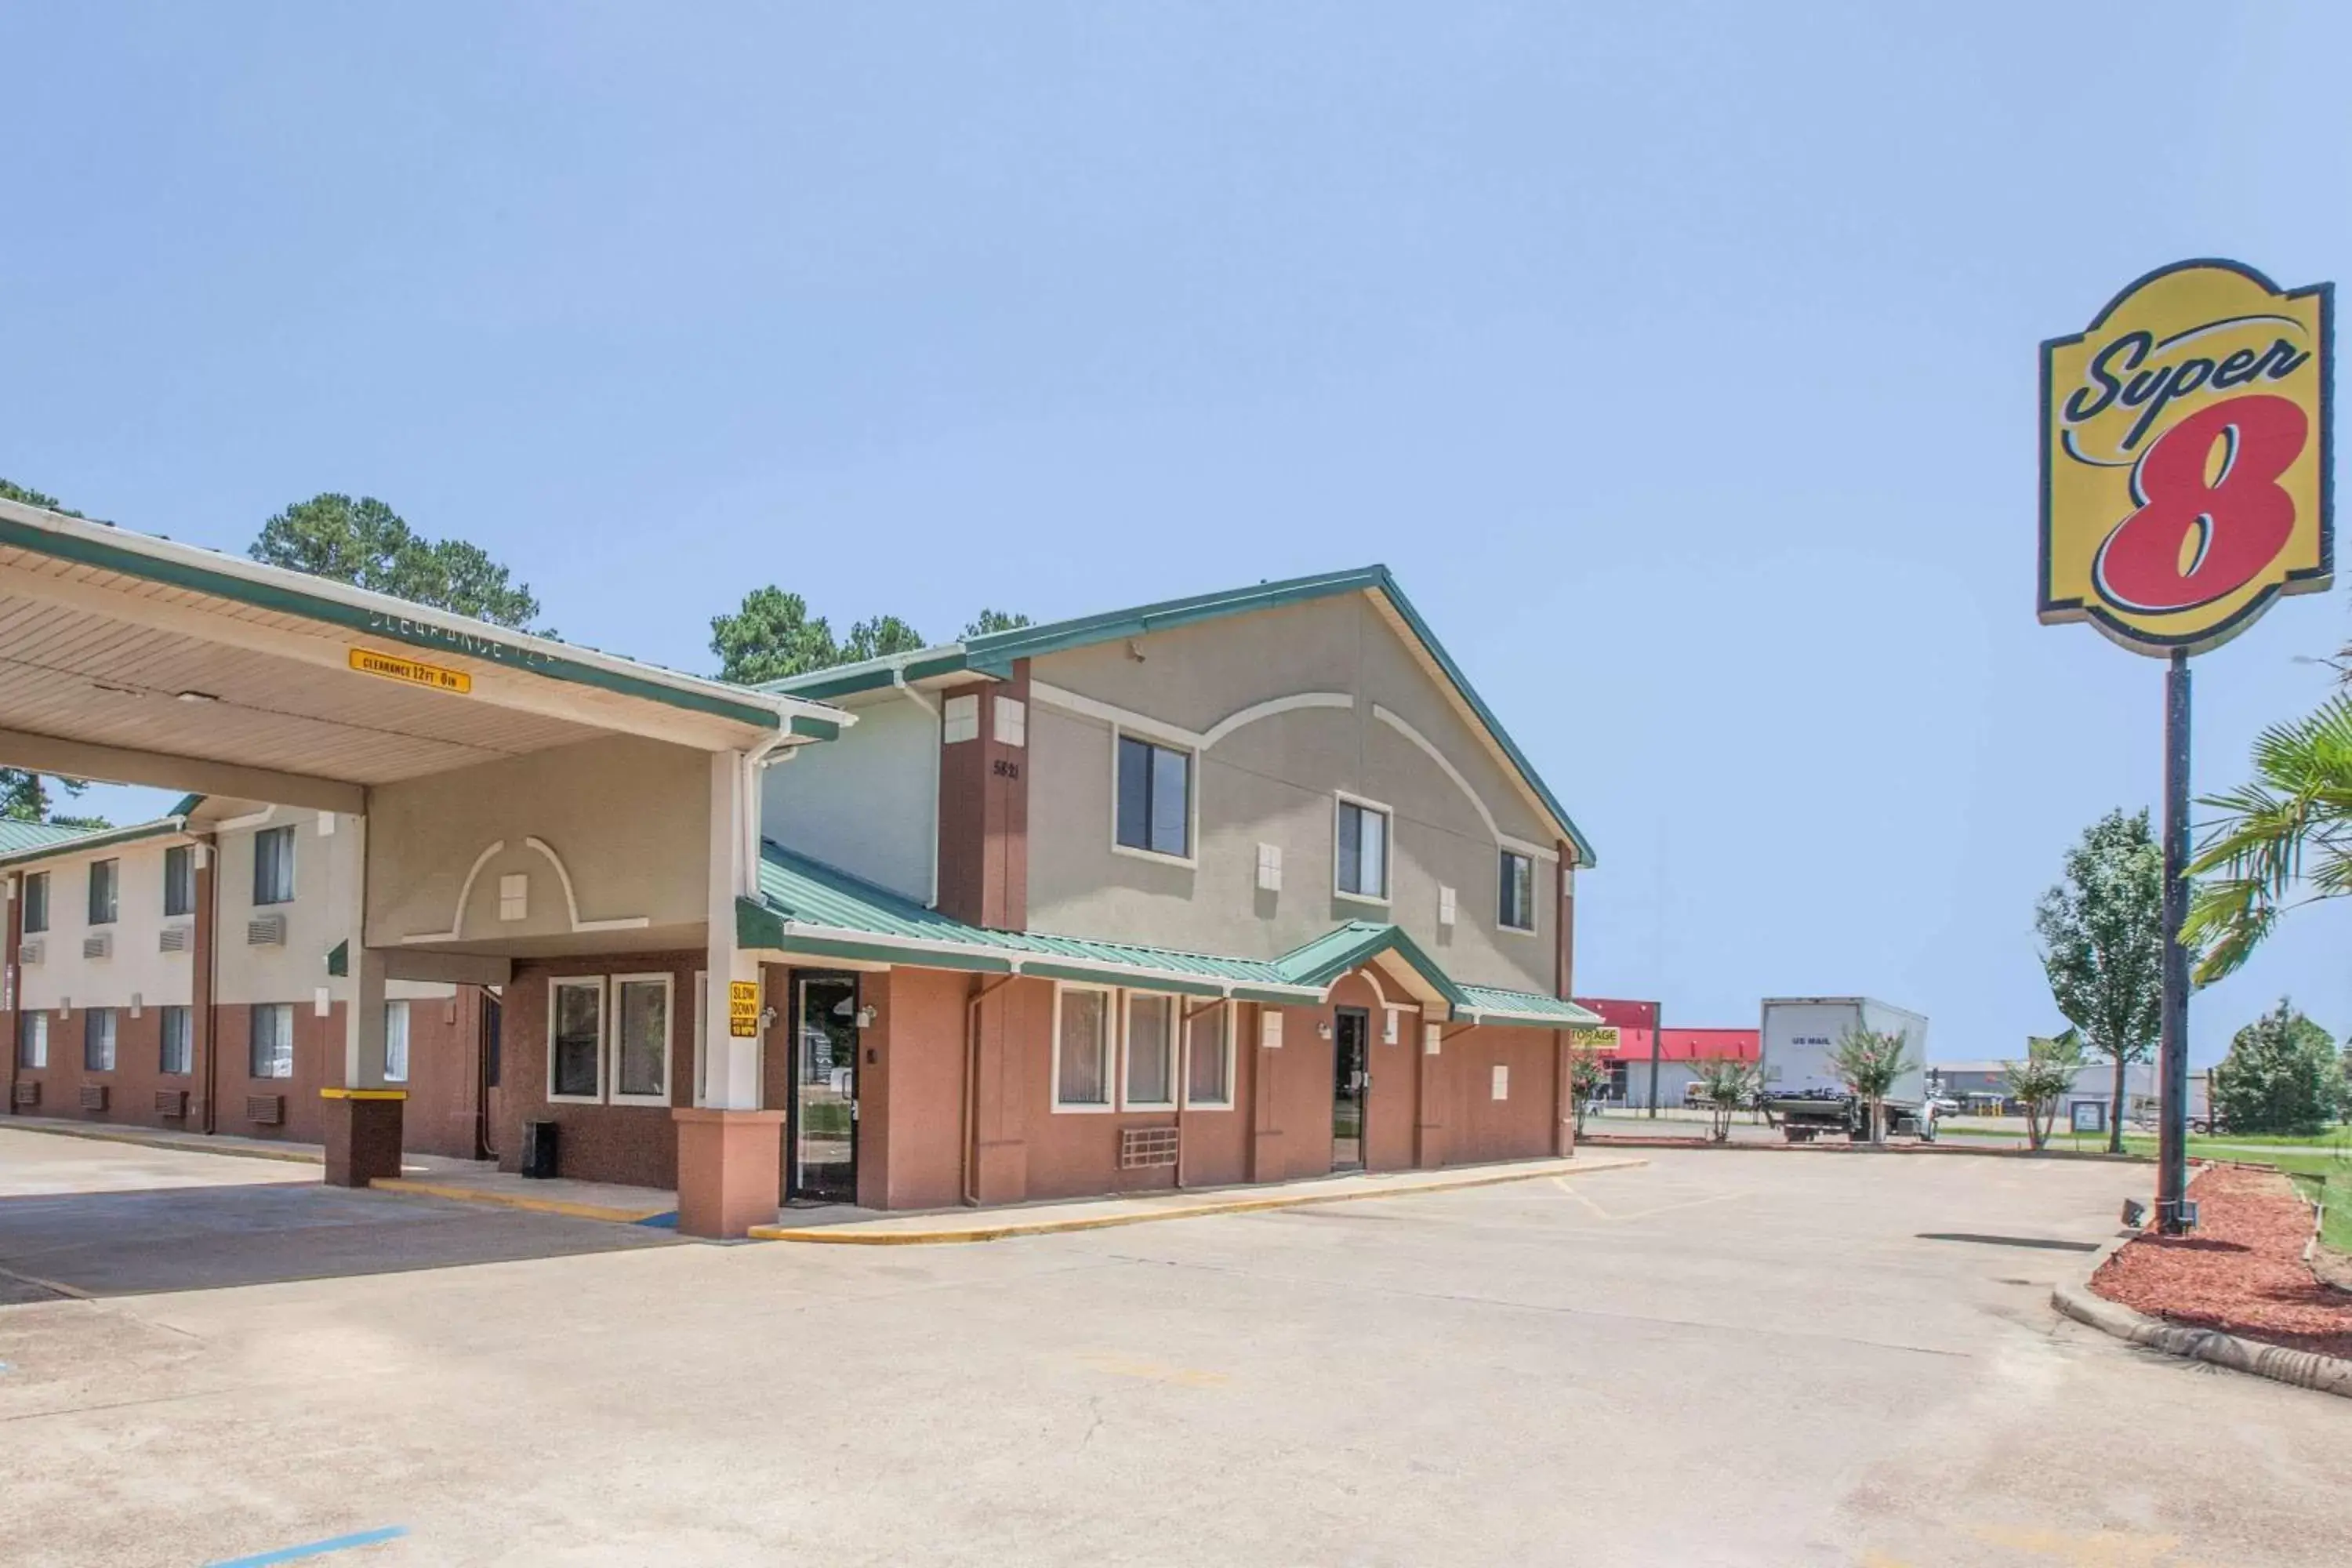 Property Building in Super 8 by Wyndham Natchitoches